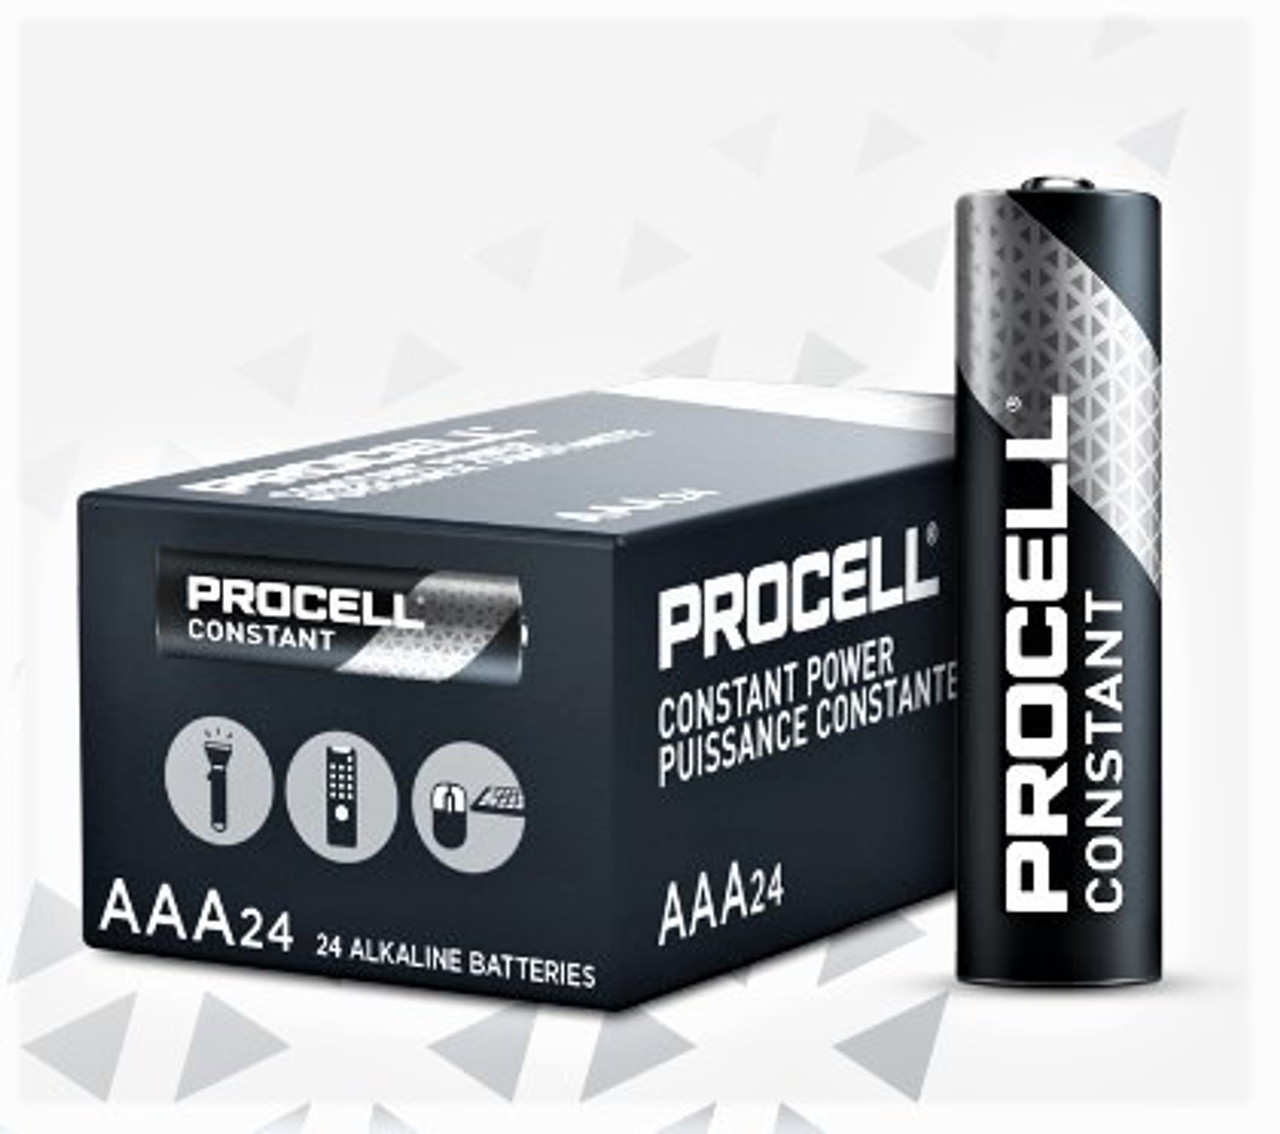 Duracell Procell AAA Alkaline Batteries - Case of 144